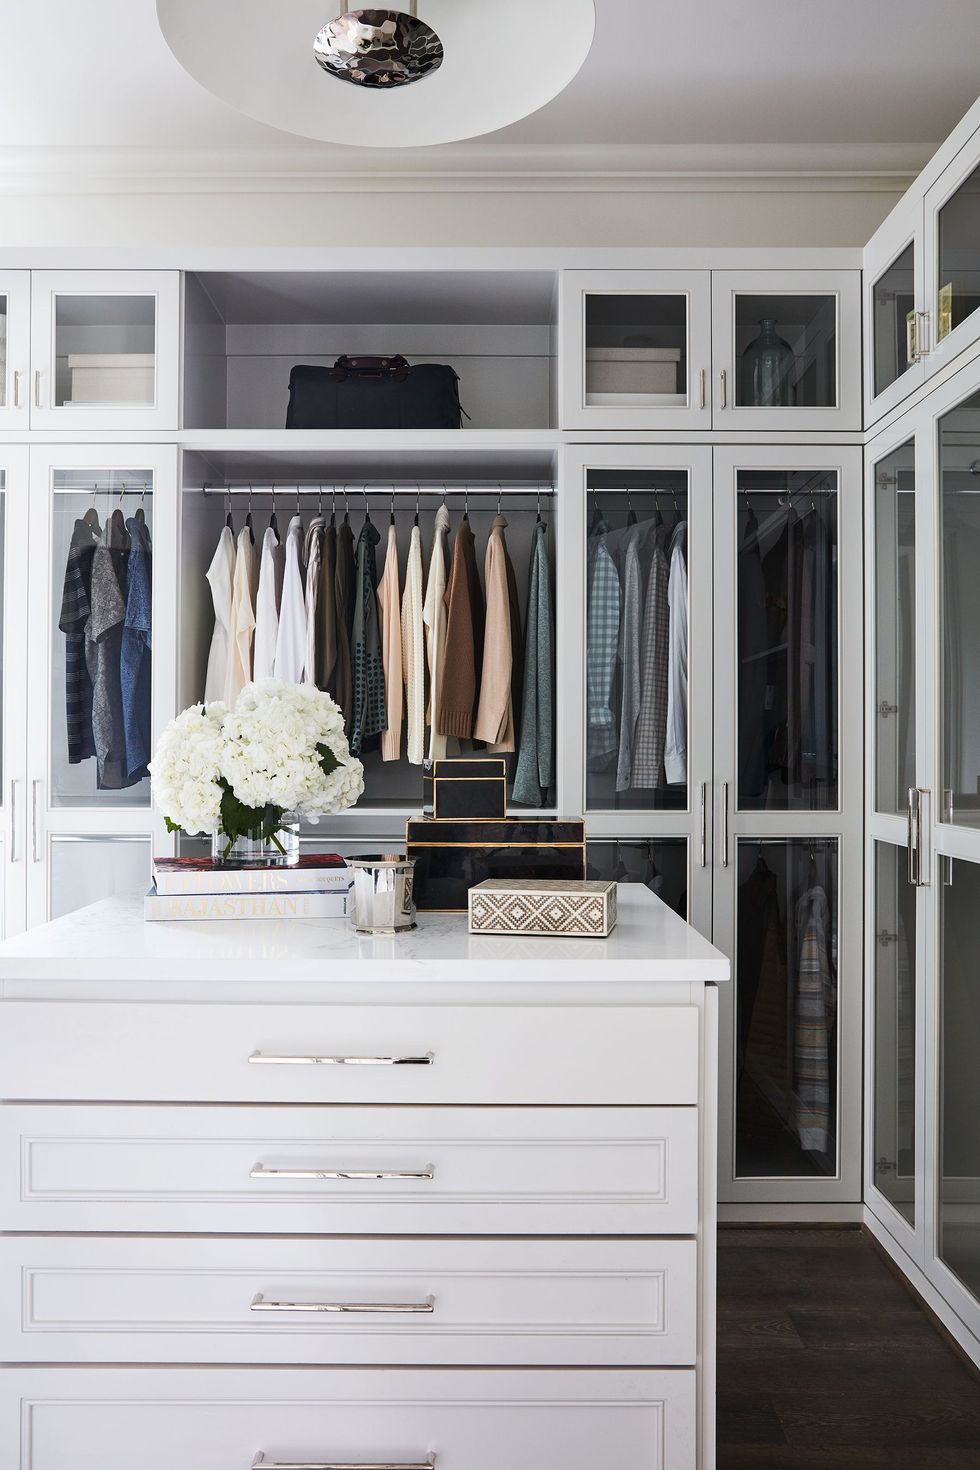 35 Best Walk In Closet Ideas And Designs For Master Bedrooms